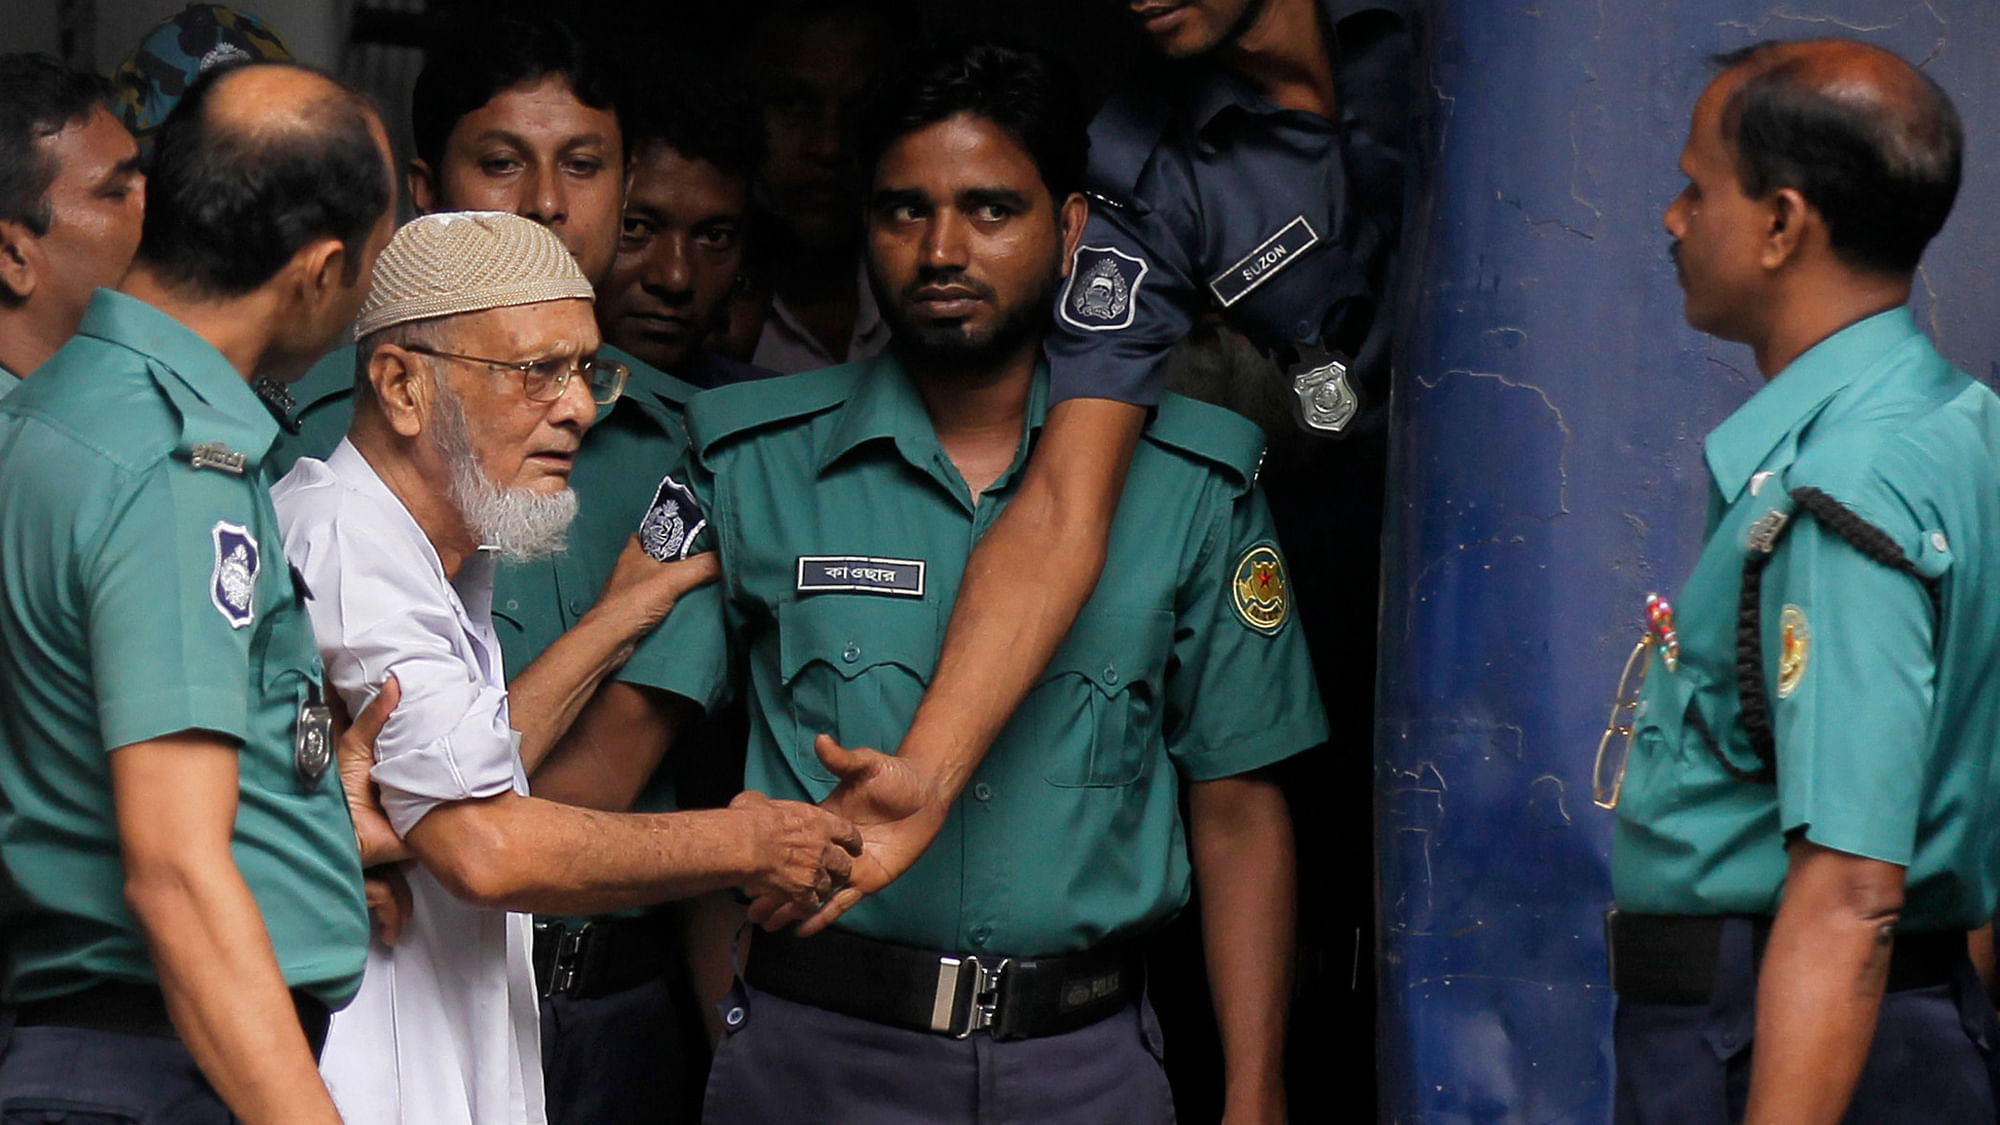 Bangladeshi policemen escort Shamsul Haque, third from left, after he was sentenced to life until death for his alleged involvement in war crimes in 1971. (Photo : AP)